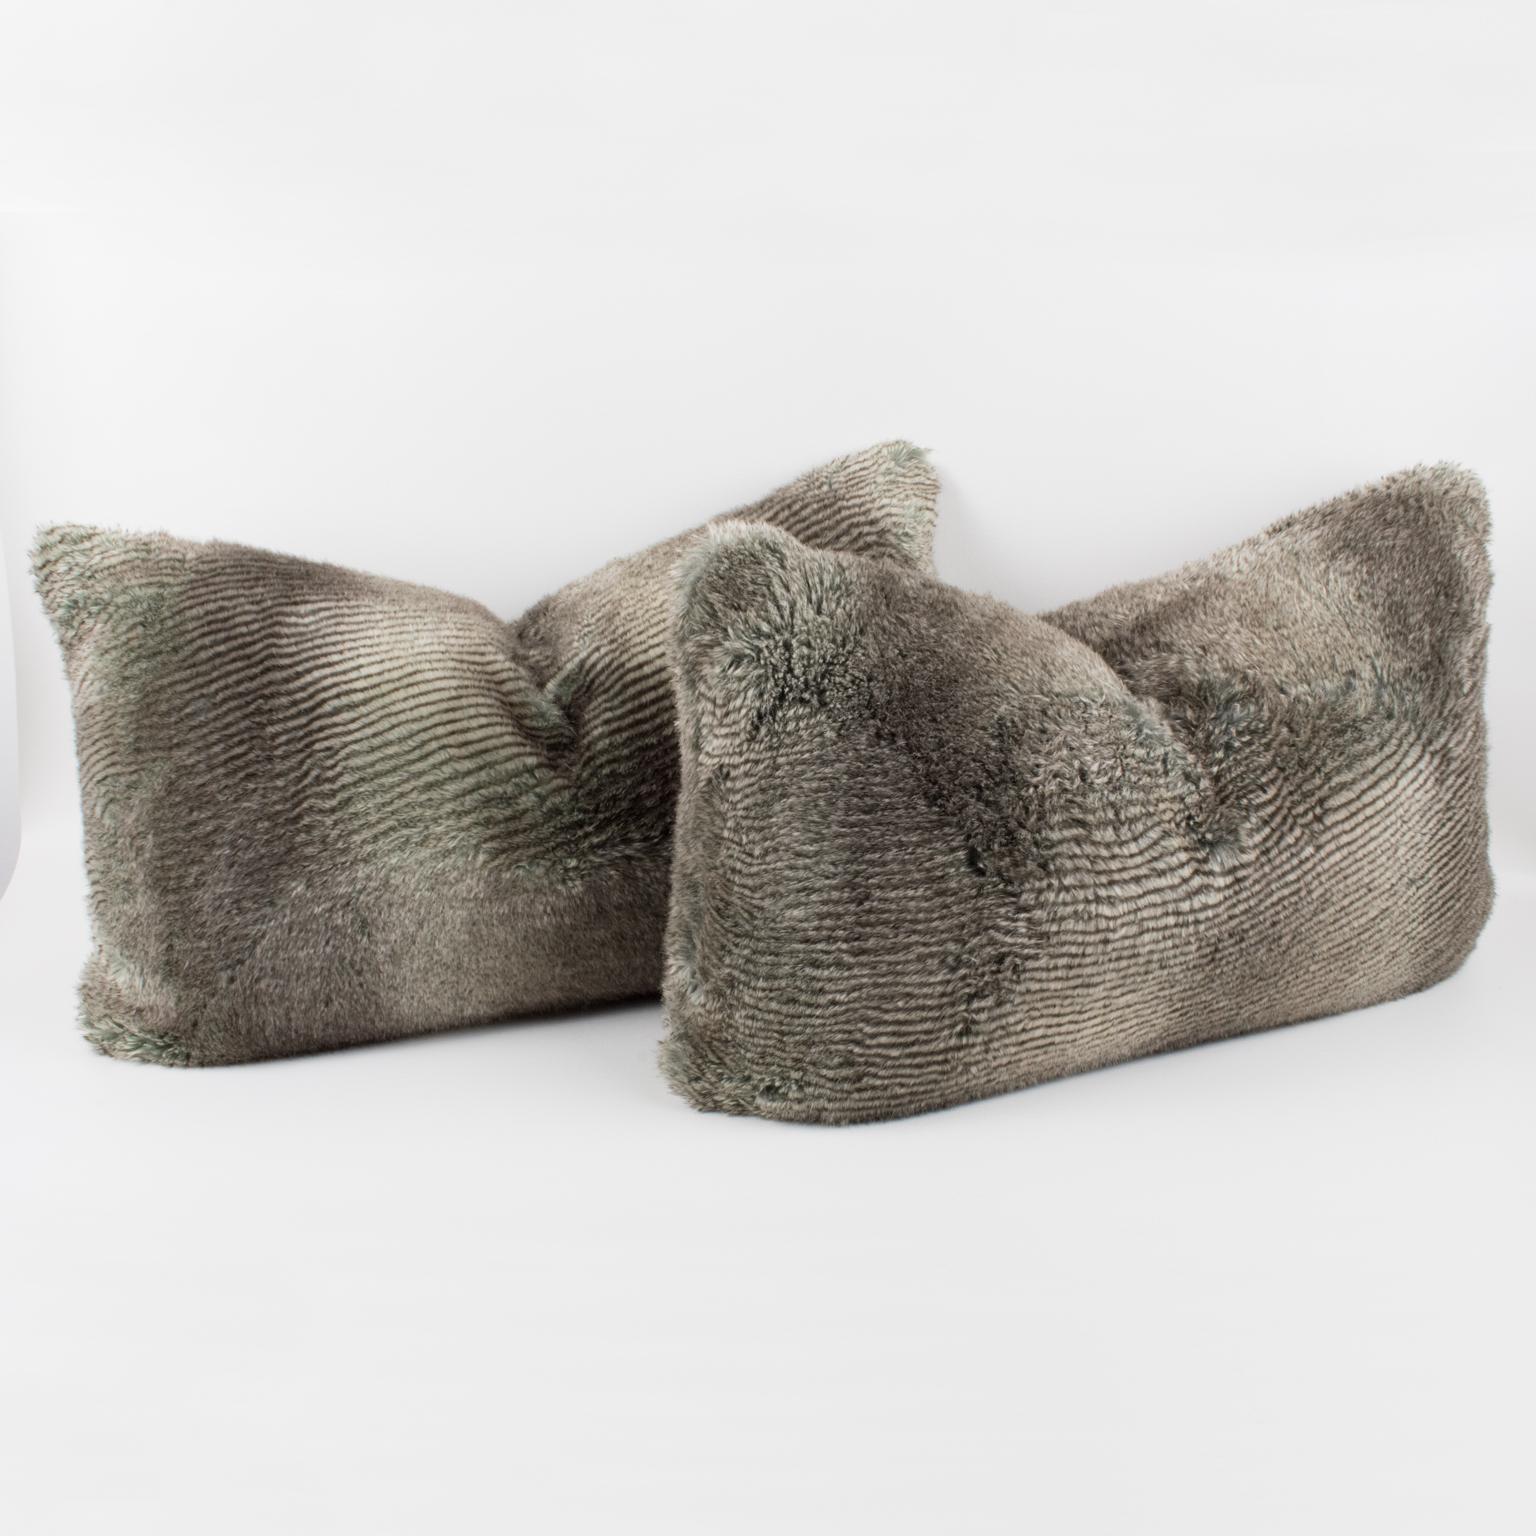 Lovely set of throw pillows by Restoration Hardware. These lumbar pillows are covered with faux fur material imitating wolf fur. A zipper encloses an inner feather pillow. An accent for the sofa or armchair with character.
Measurements: 25 in. wide